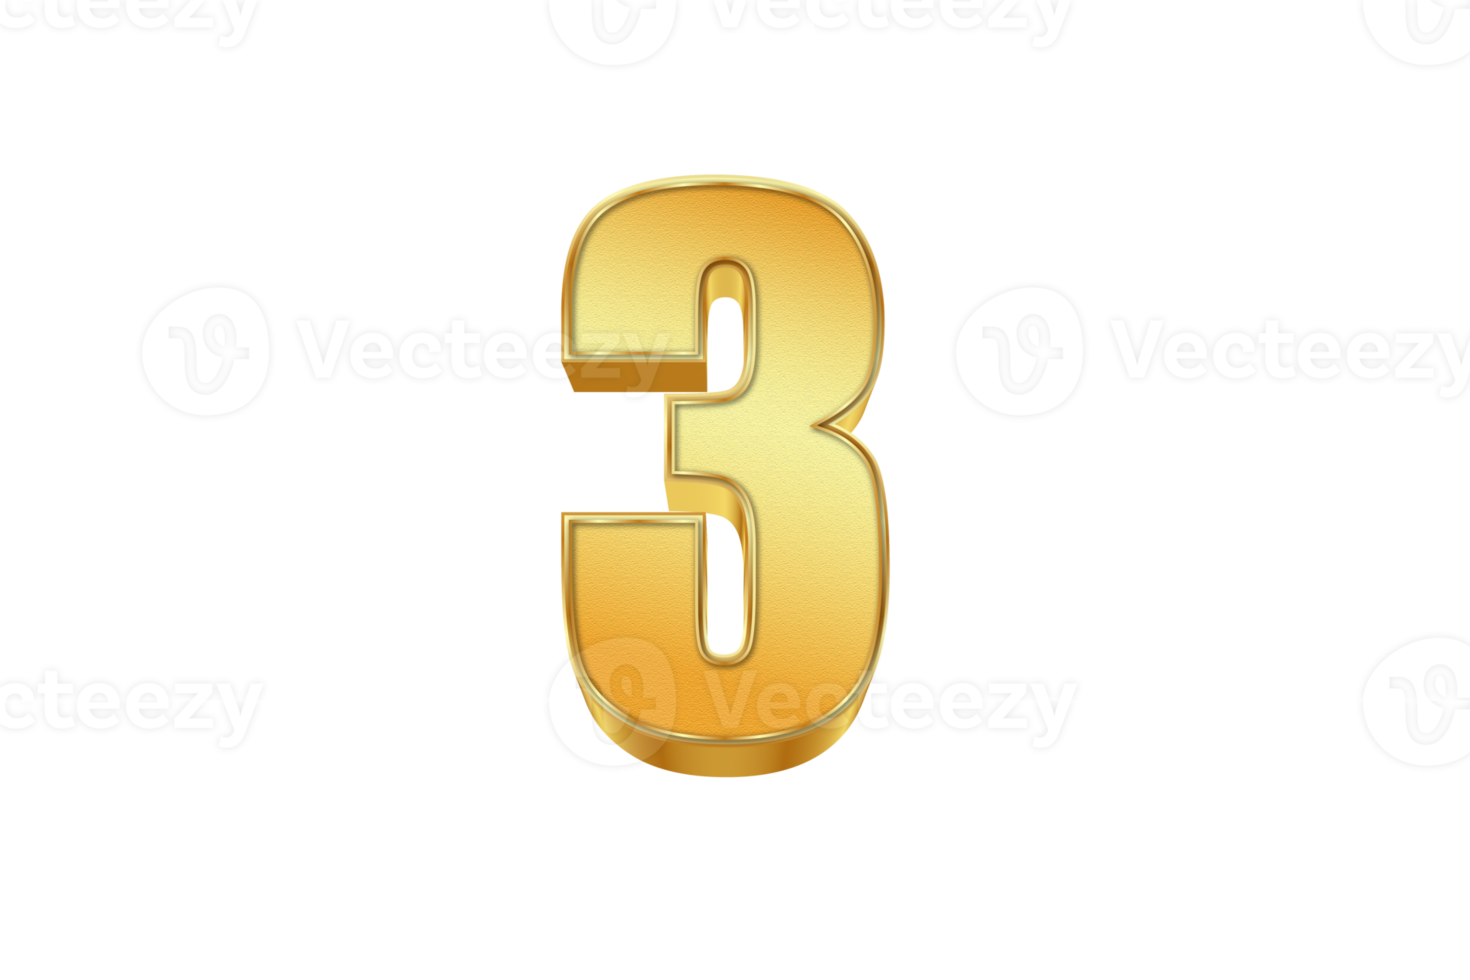 Numbers written in gold style, in PNG format.